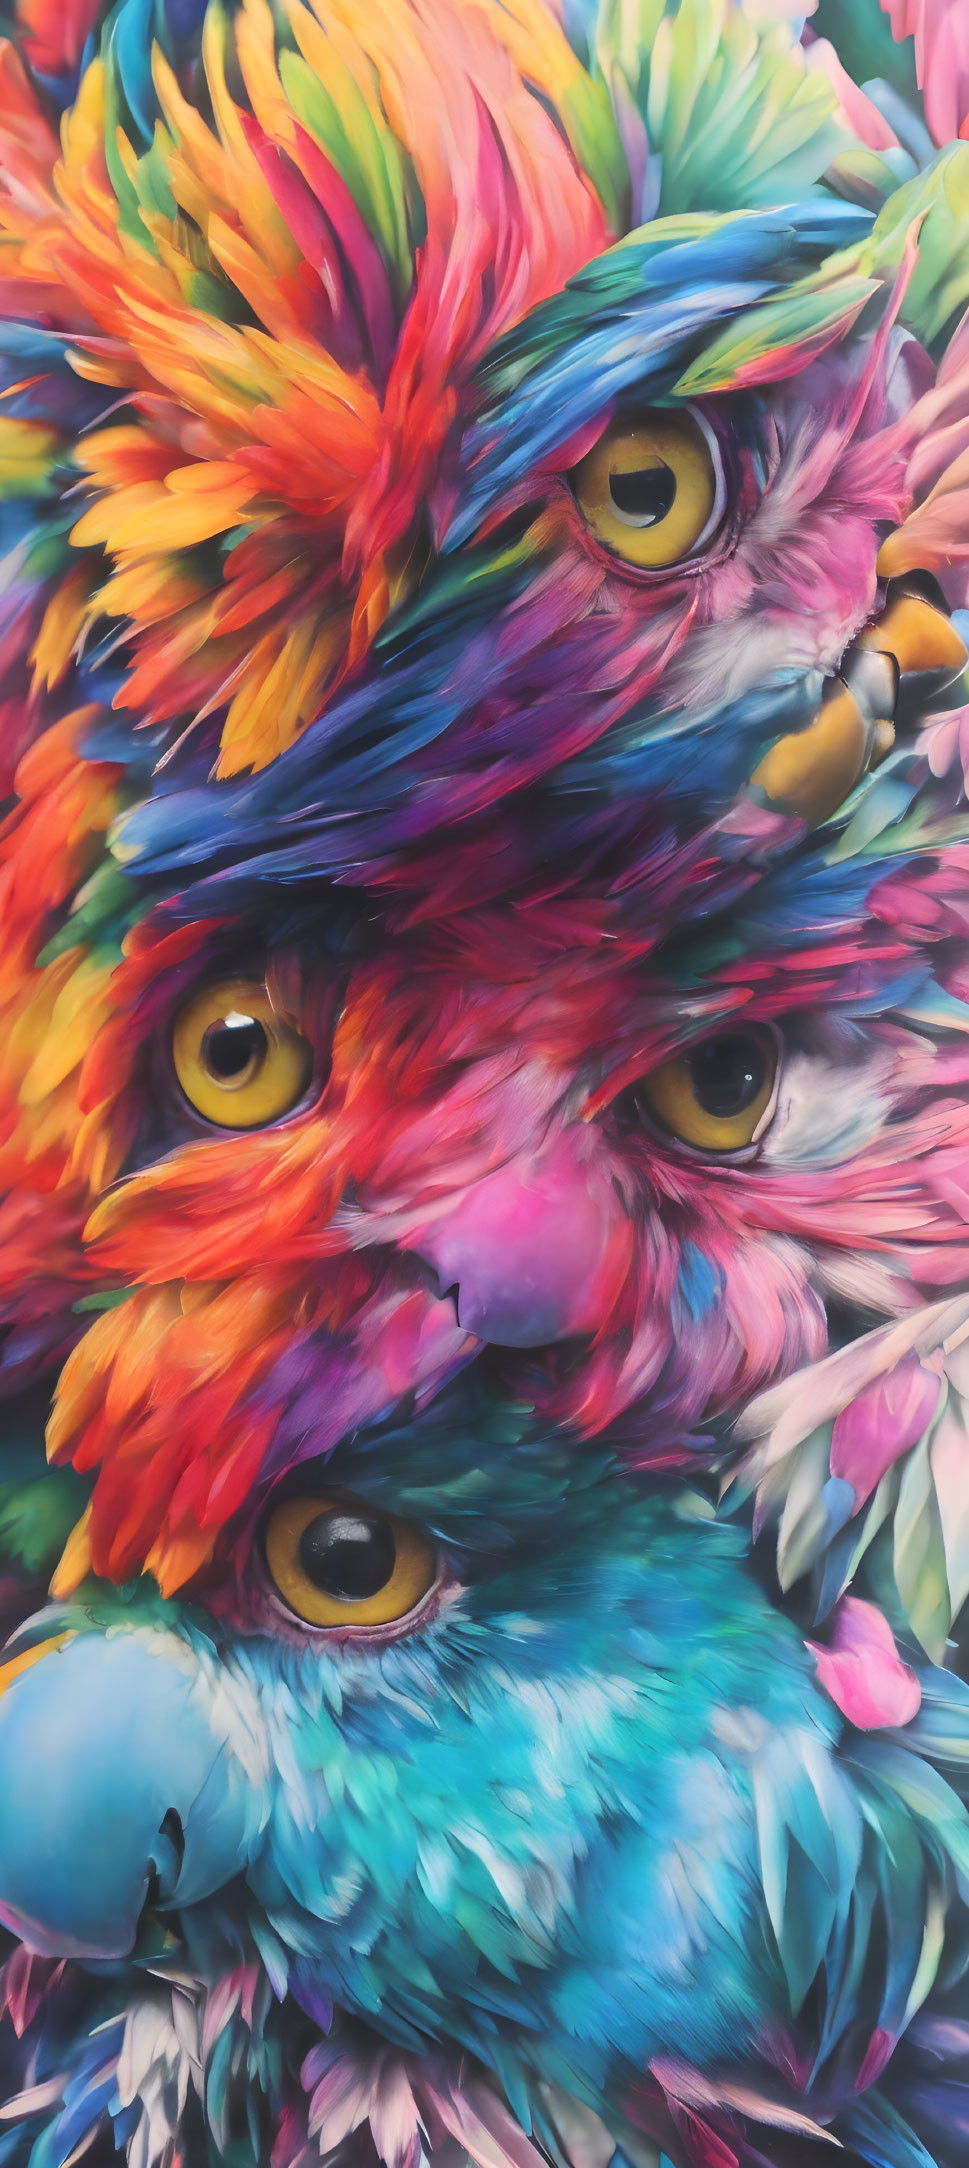 Vibrant Parrot Faces with Detailed Feathers and Eyes